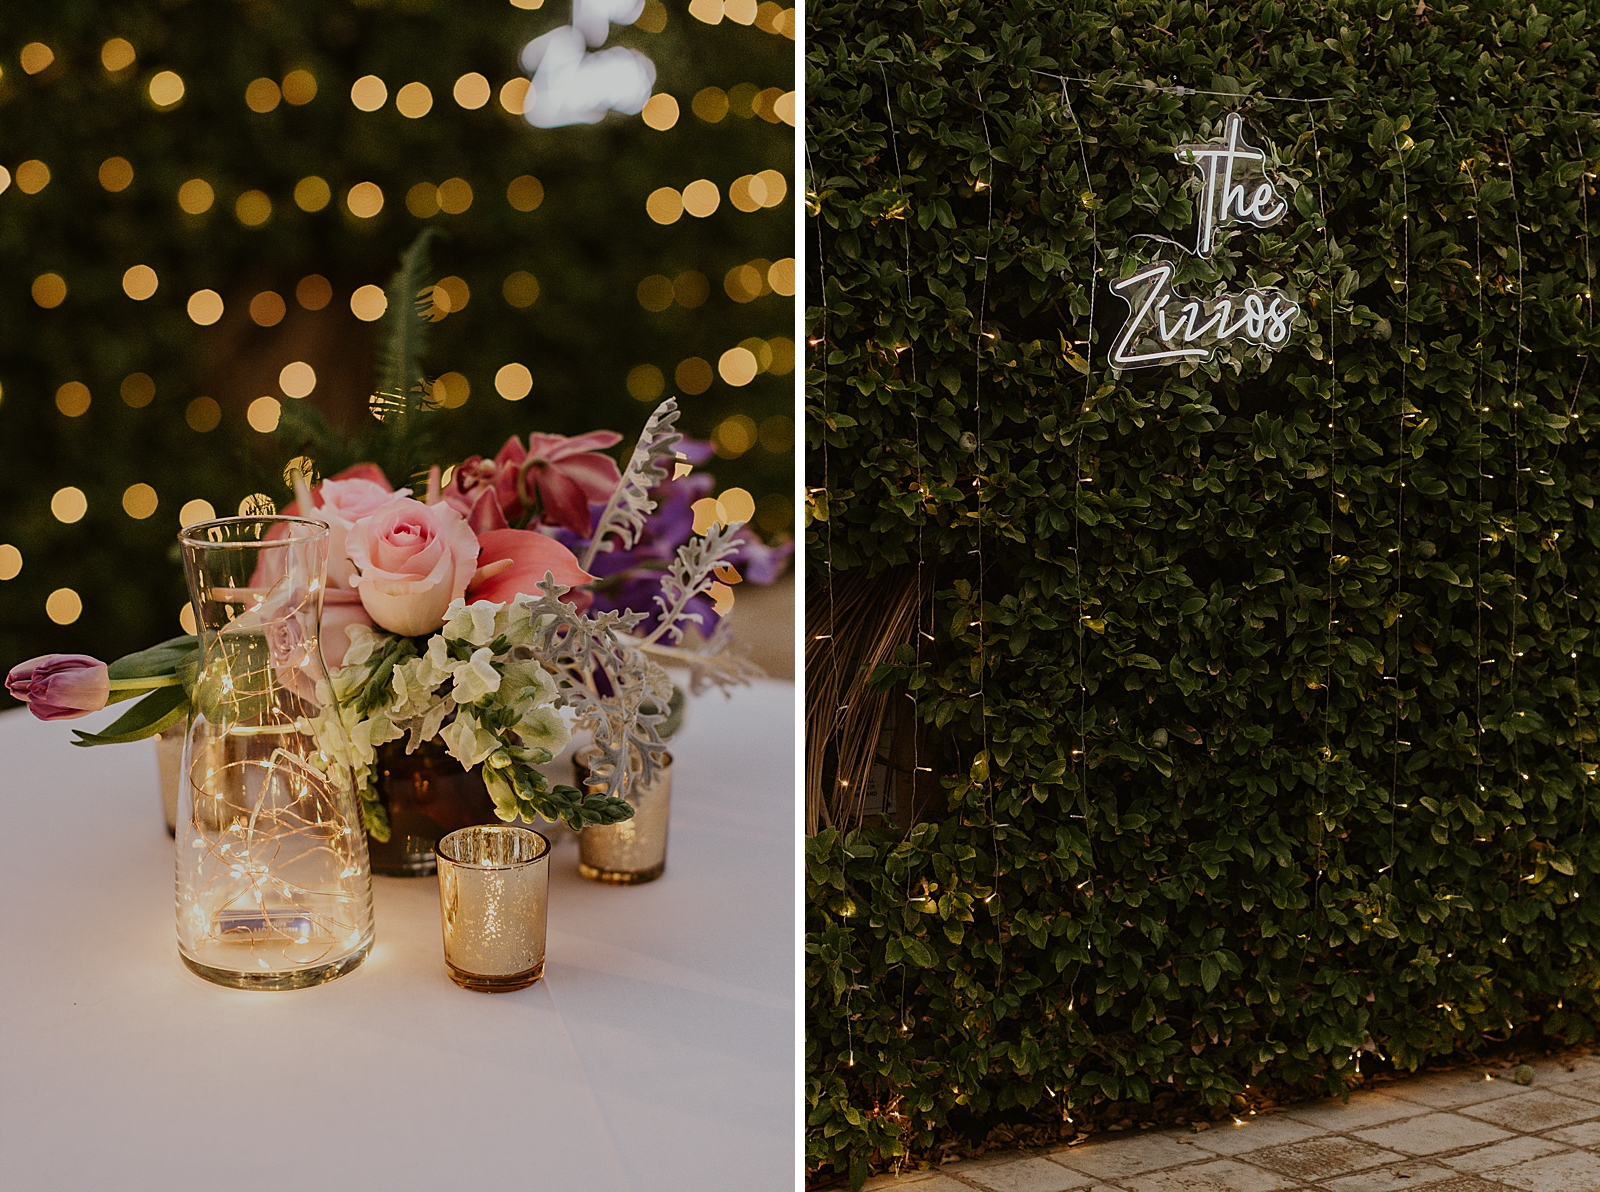 Detail shot of floral centerpiece and last name sign in front of greenery